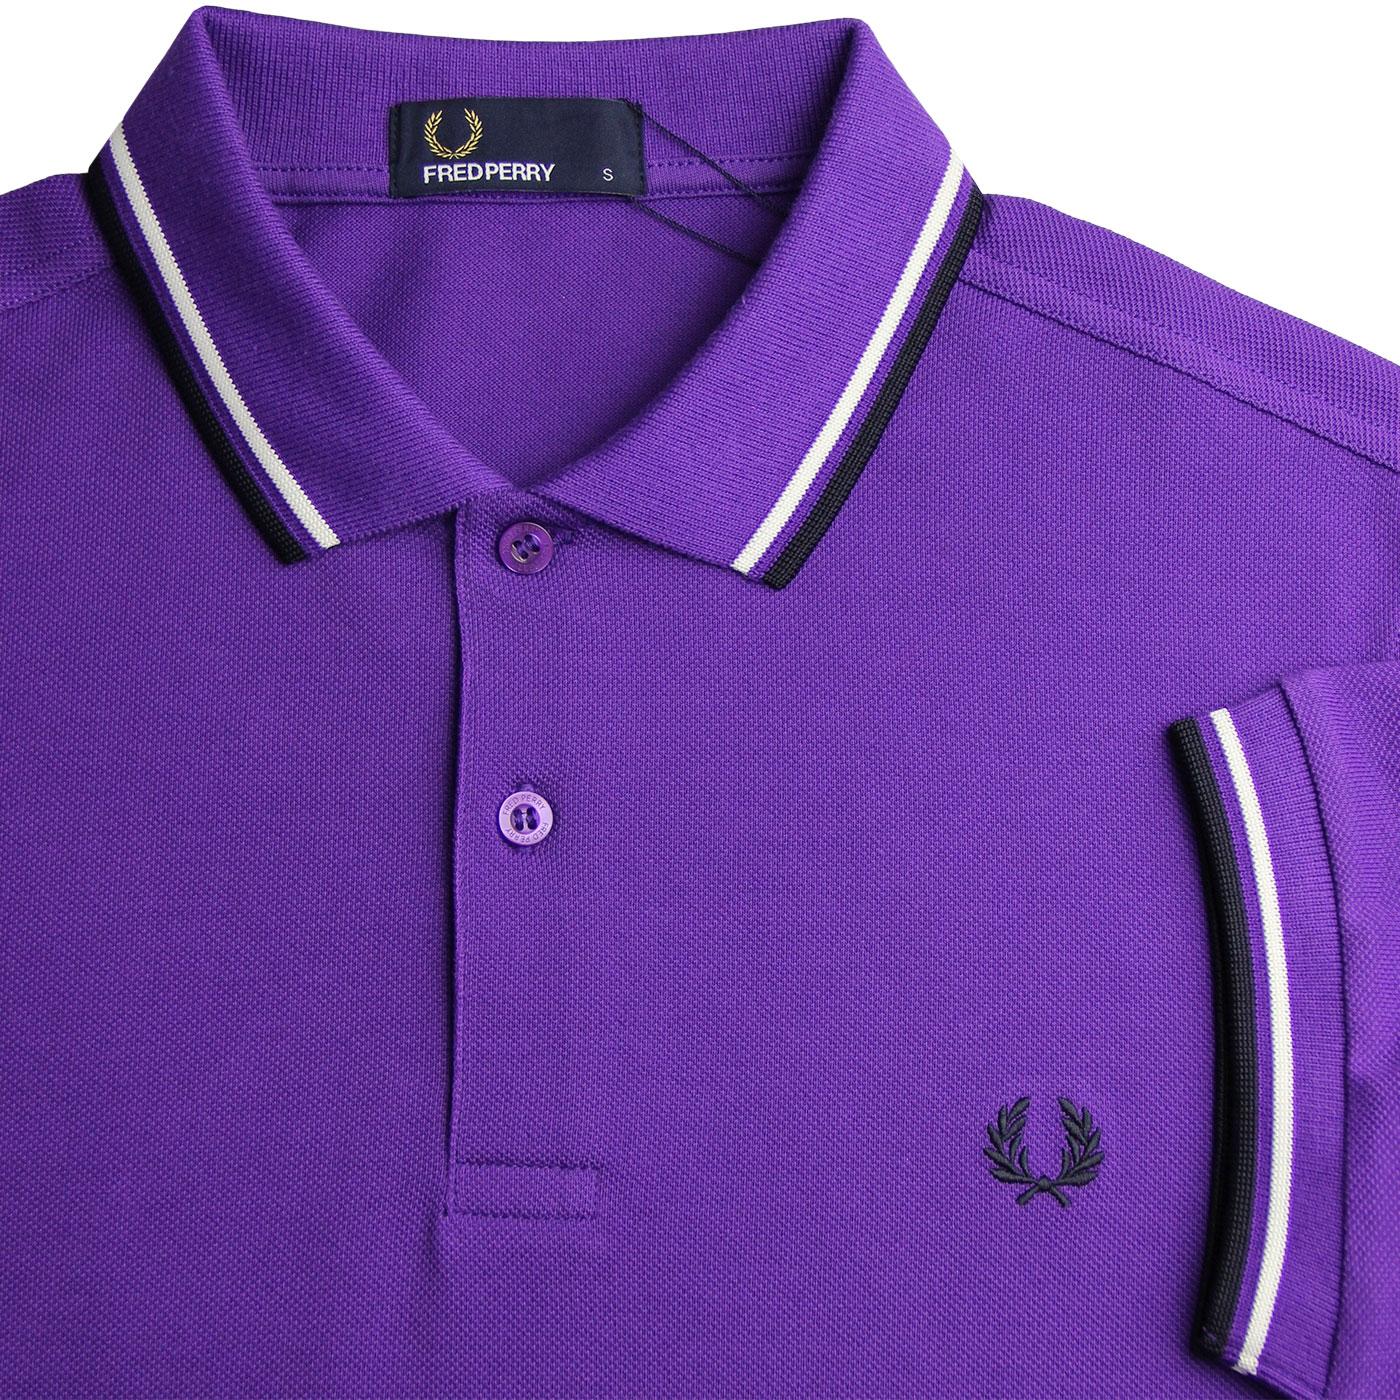 FRED PERRY M3600 Retro Mod Twin Tipped Polo Shirt Purple